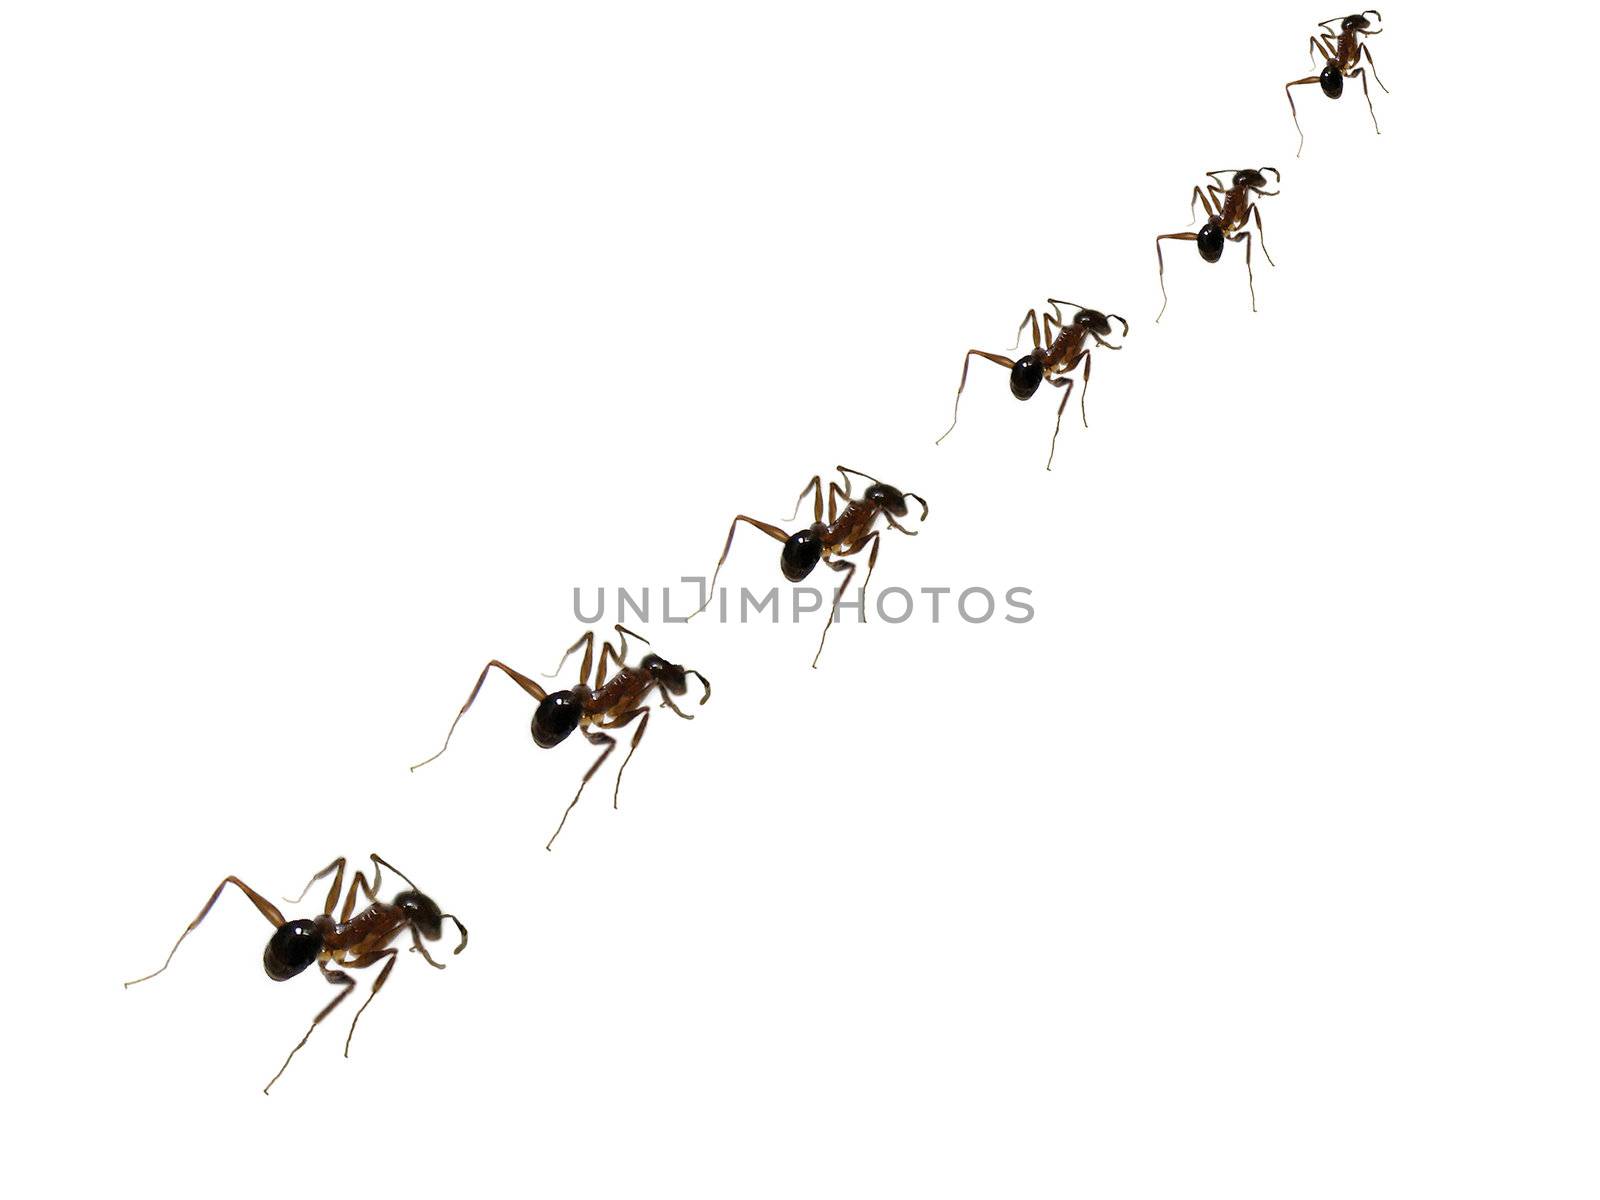 A metaphorical image of a team of ants walking in a line to their food resource in strict discipline